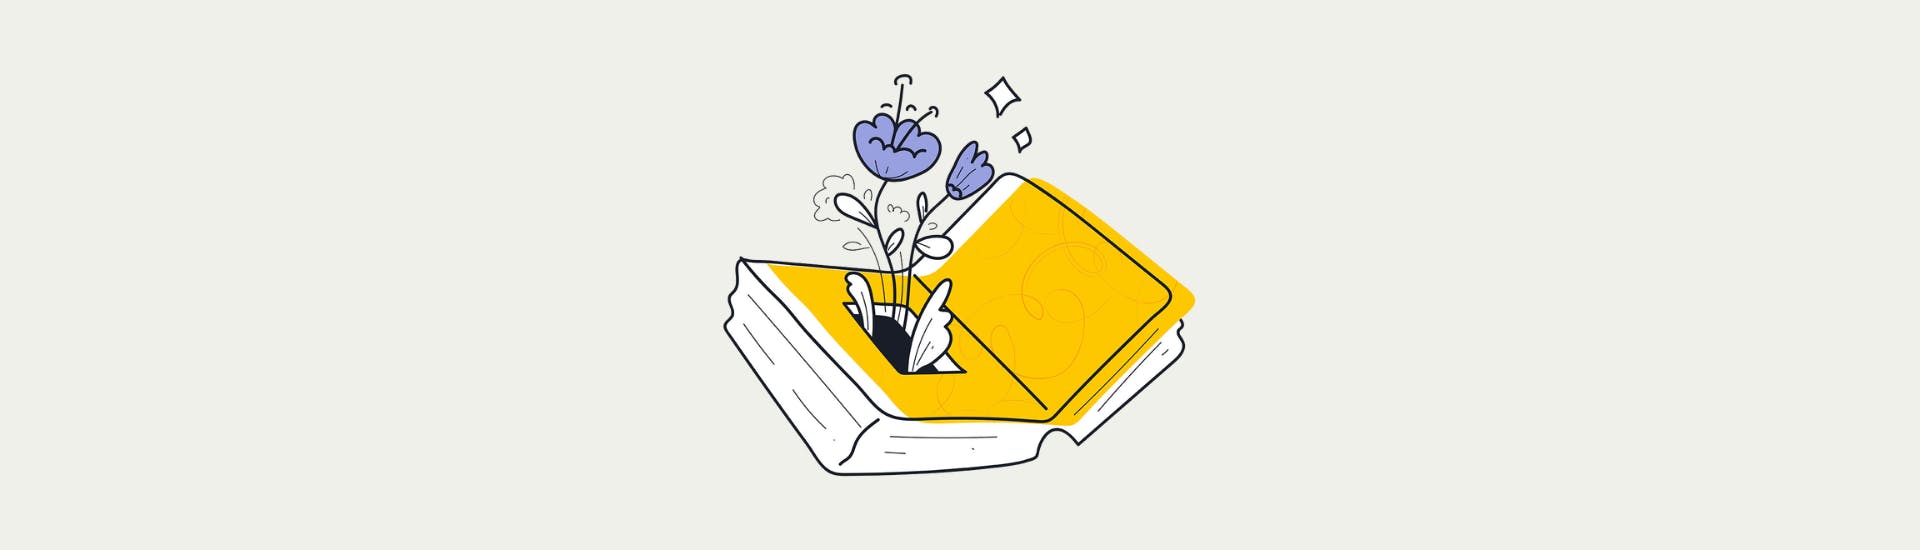 Illustration in the Scribit.Pro colors of an open book with flowers growing out of it.